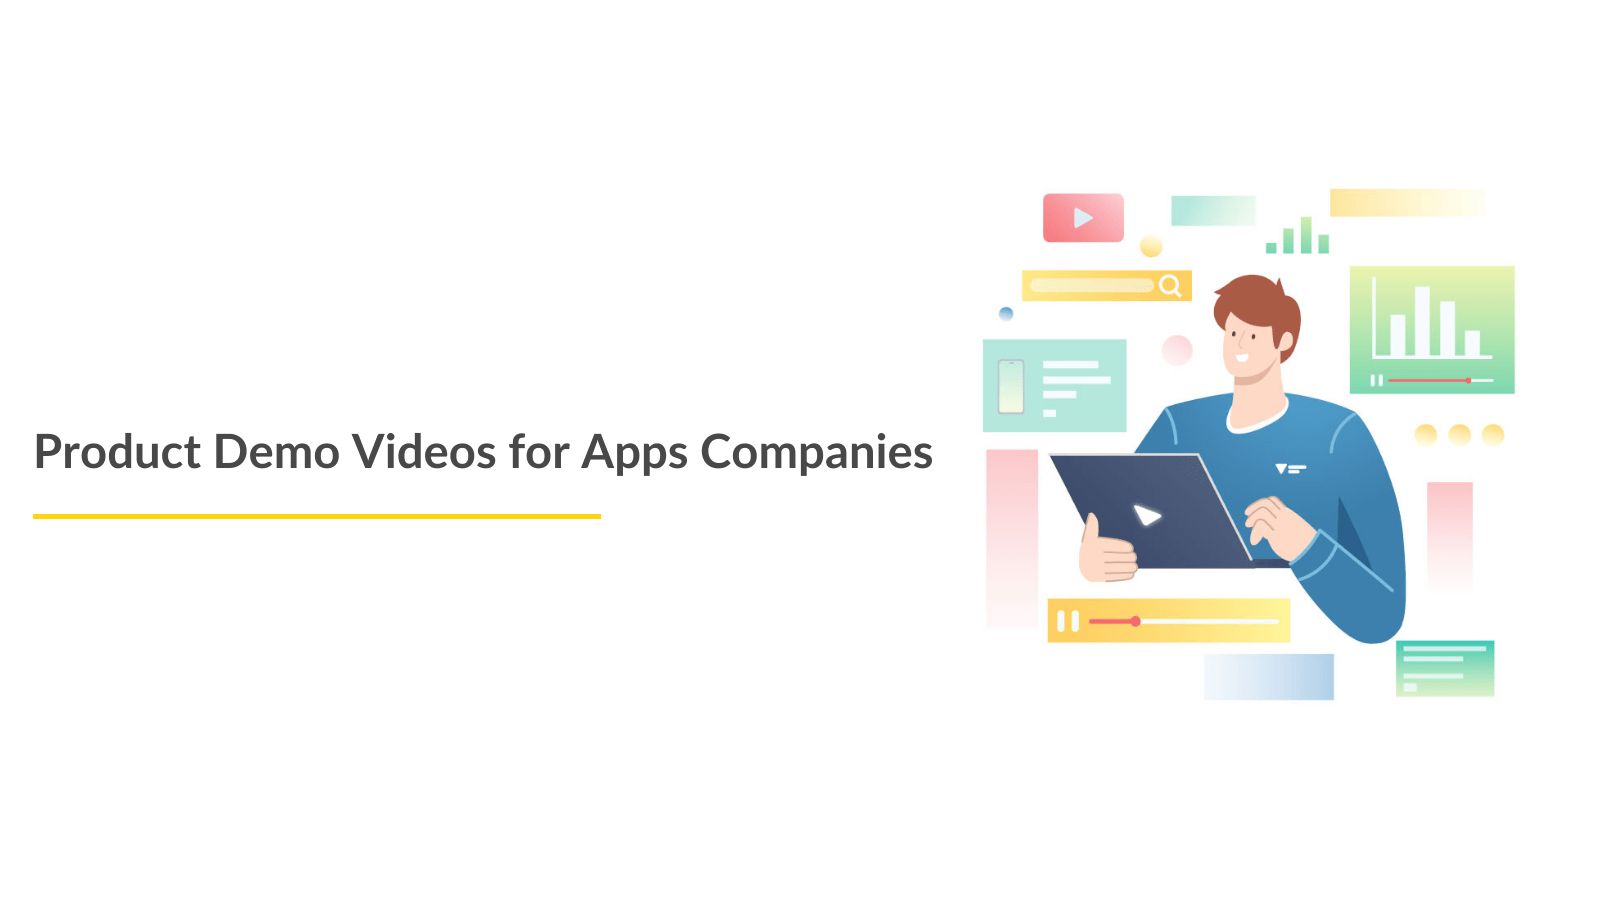 Product Demo Videos for Apps Companies